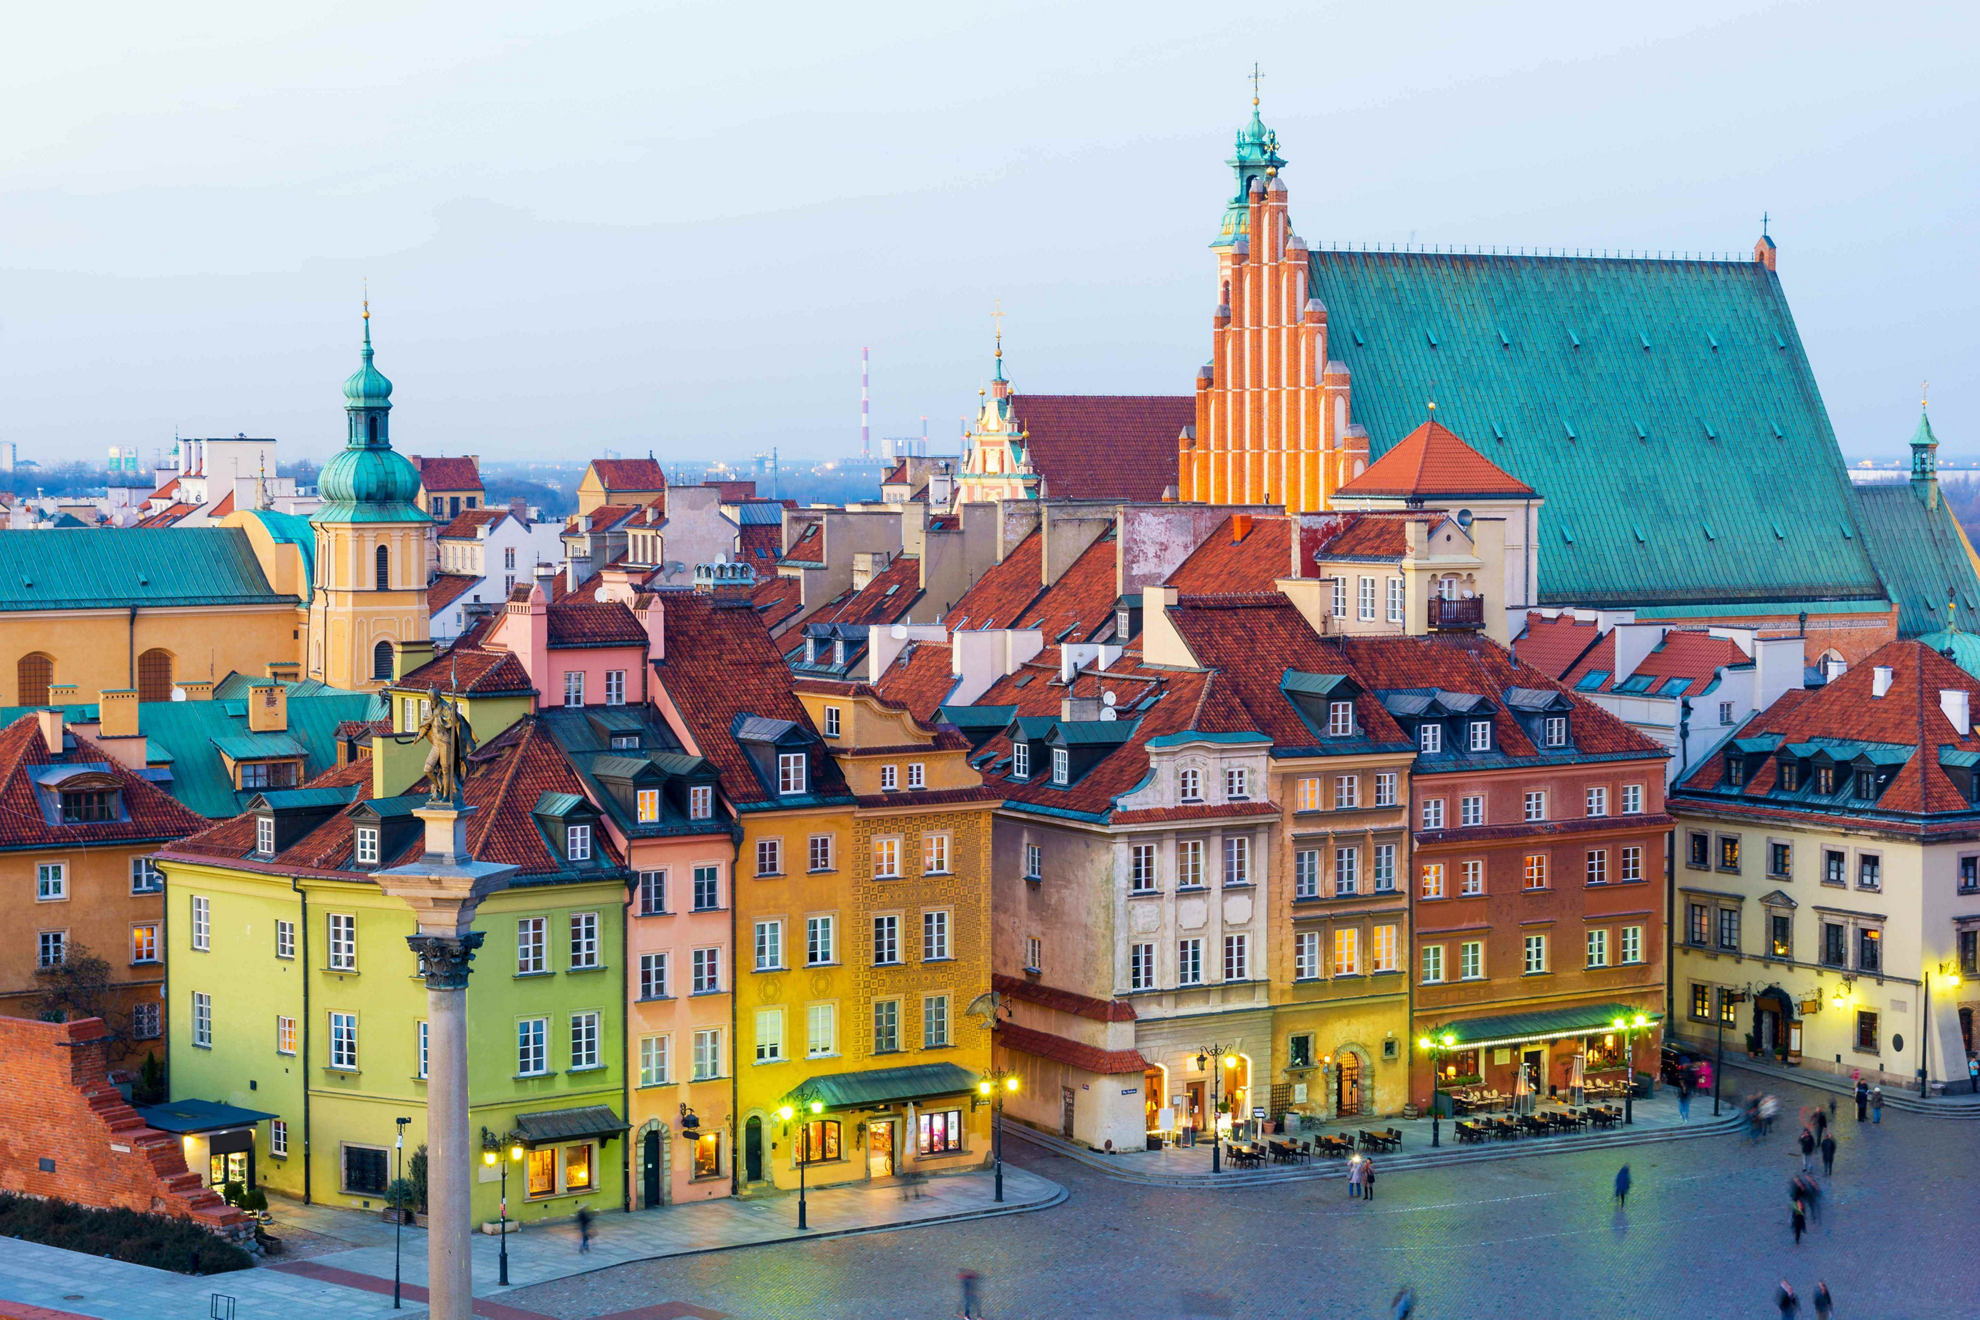 Travel to Poland and discover all the exciting things to see in Warsaw